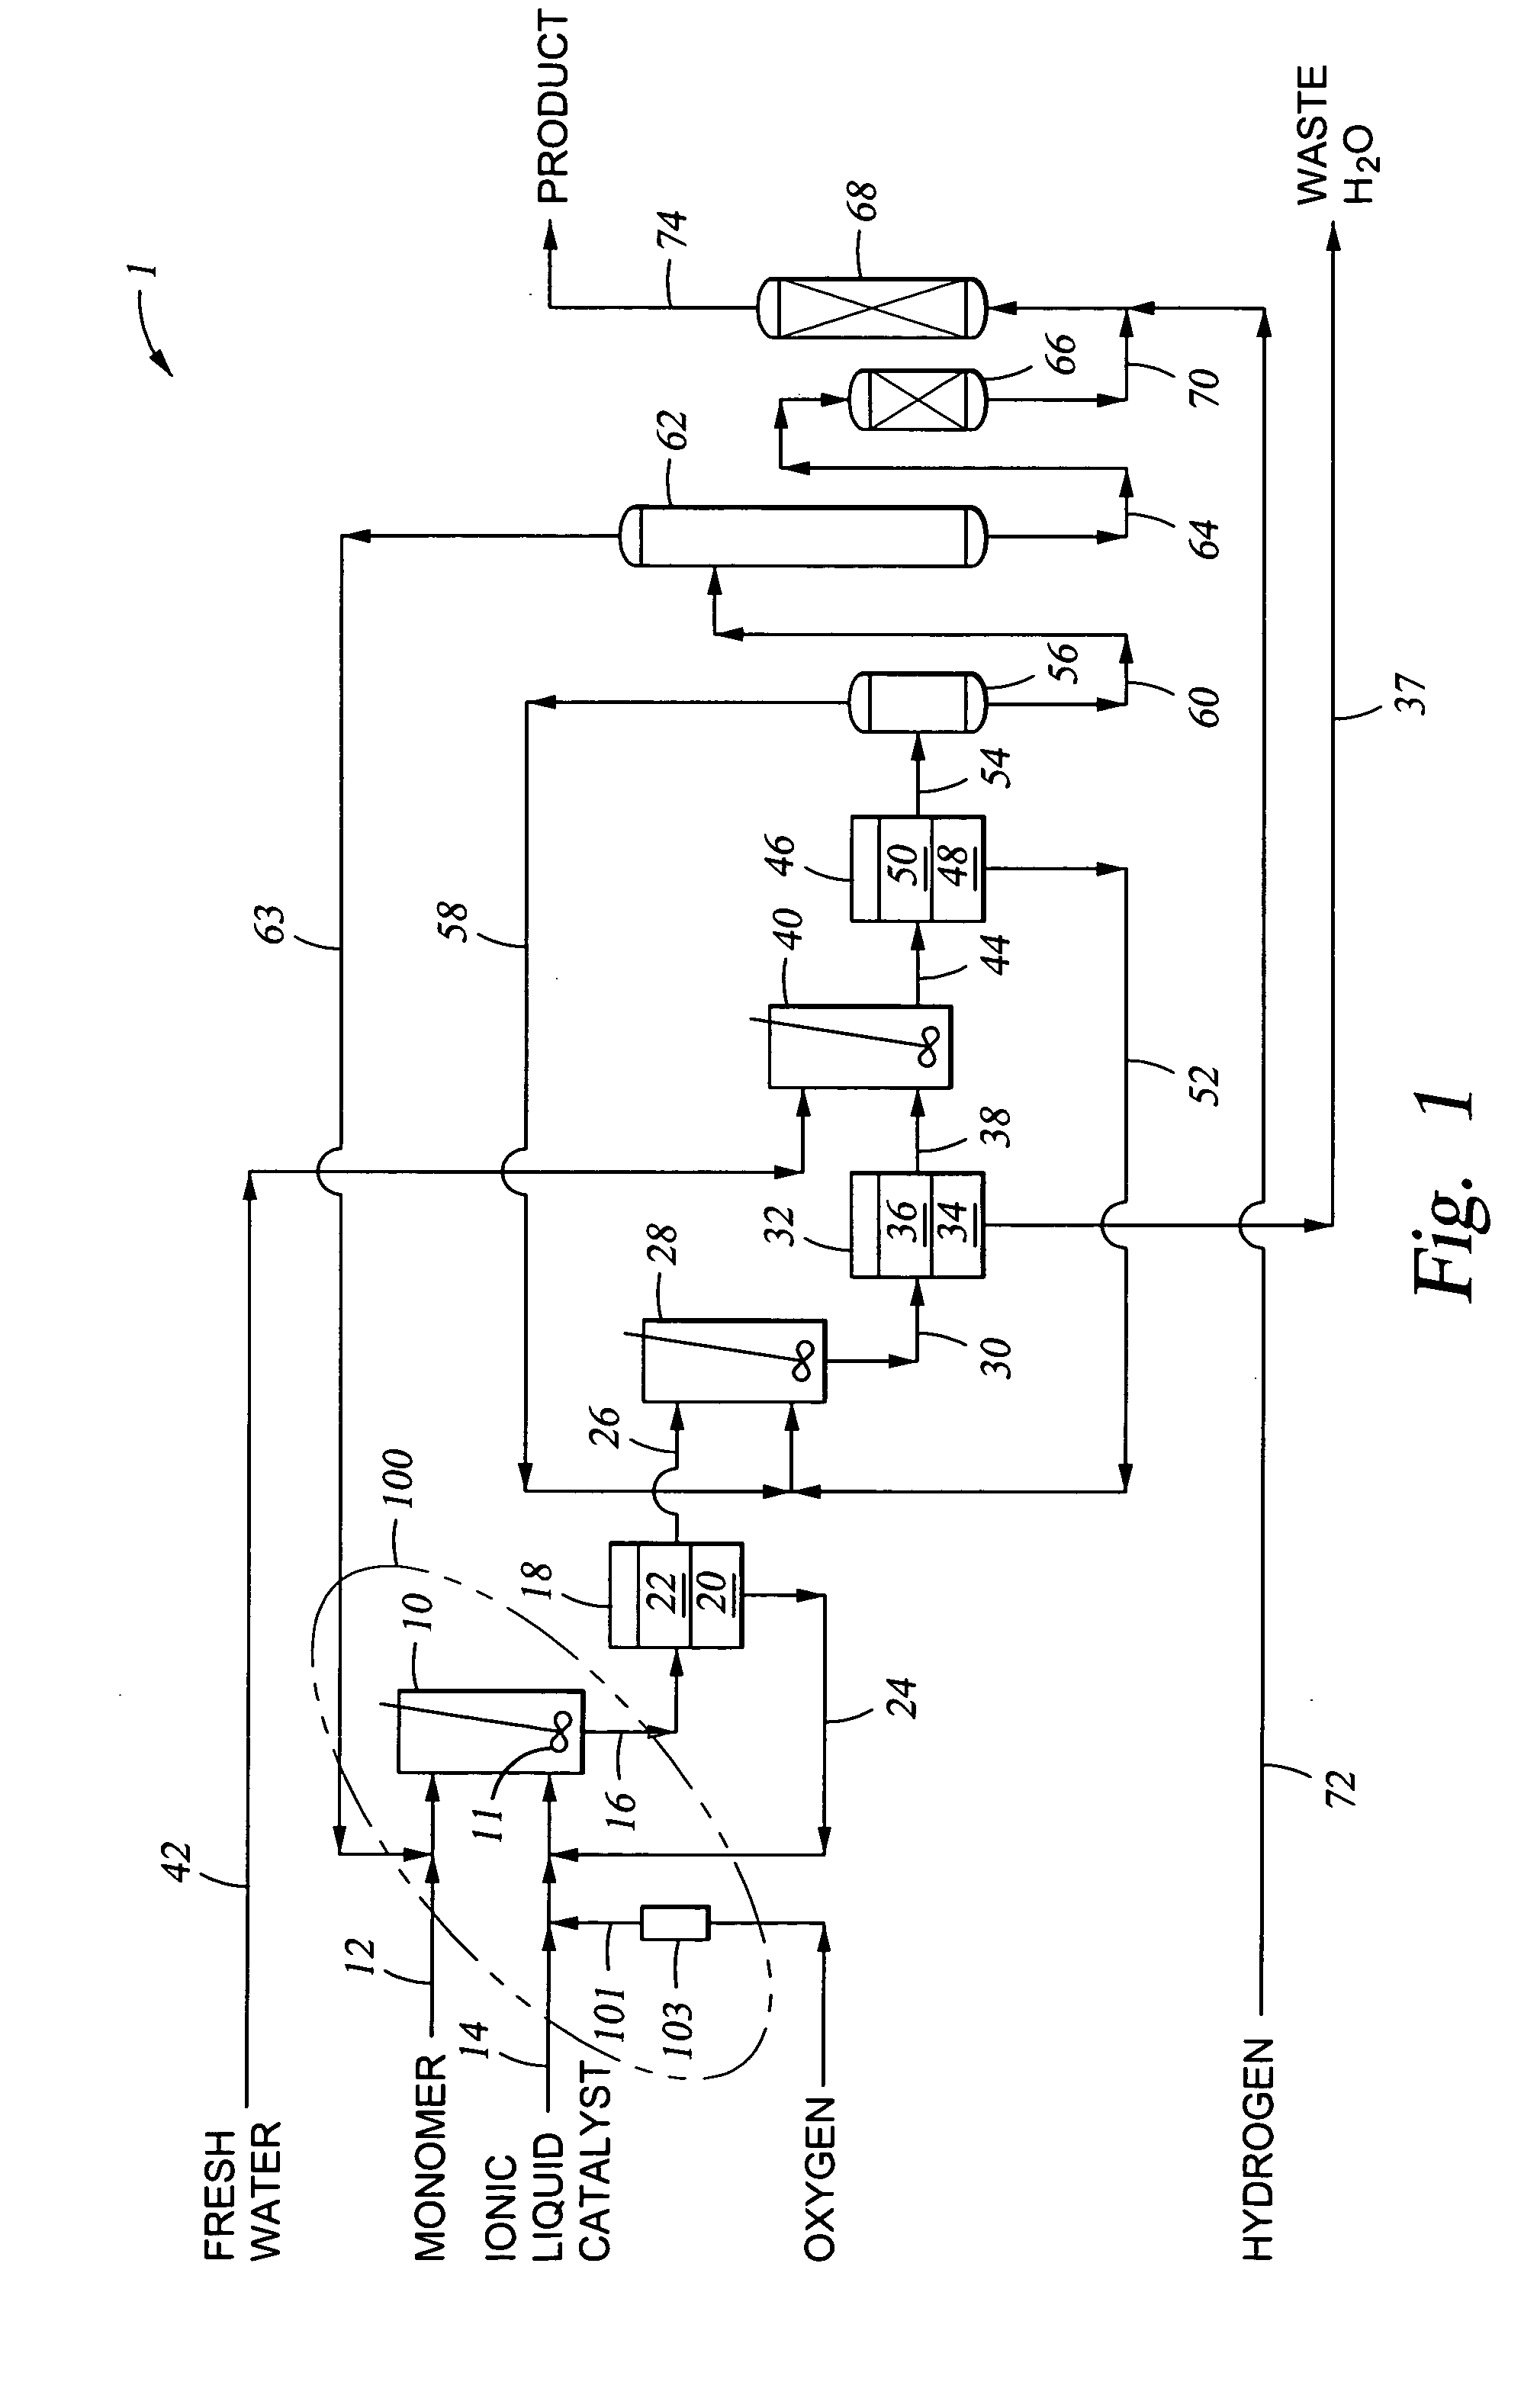 Method and system to contact an ionic liquid catalyst with oxygen to improve a chemical reaction